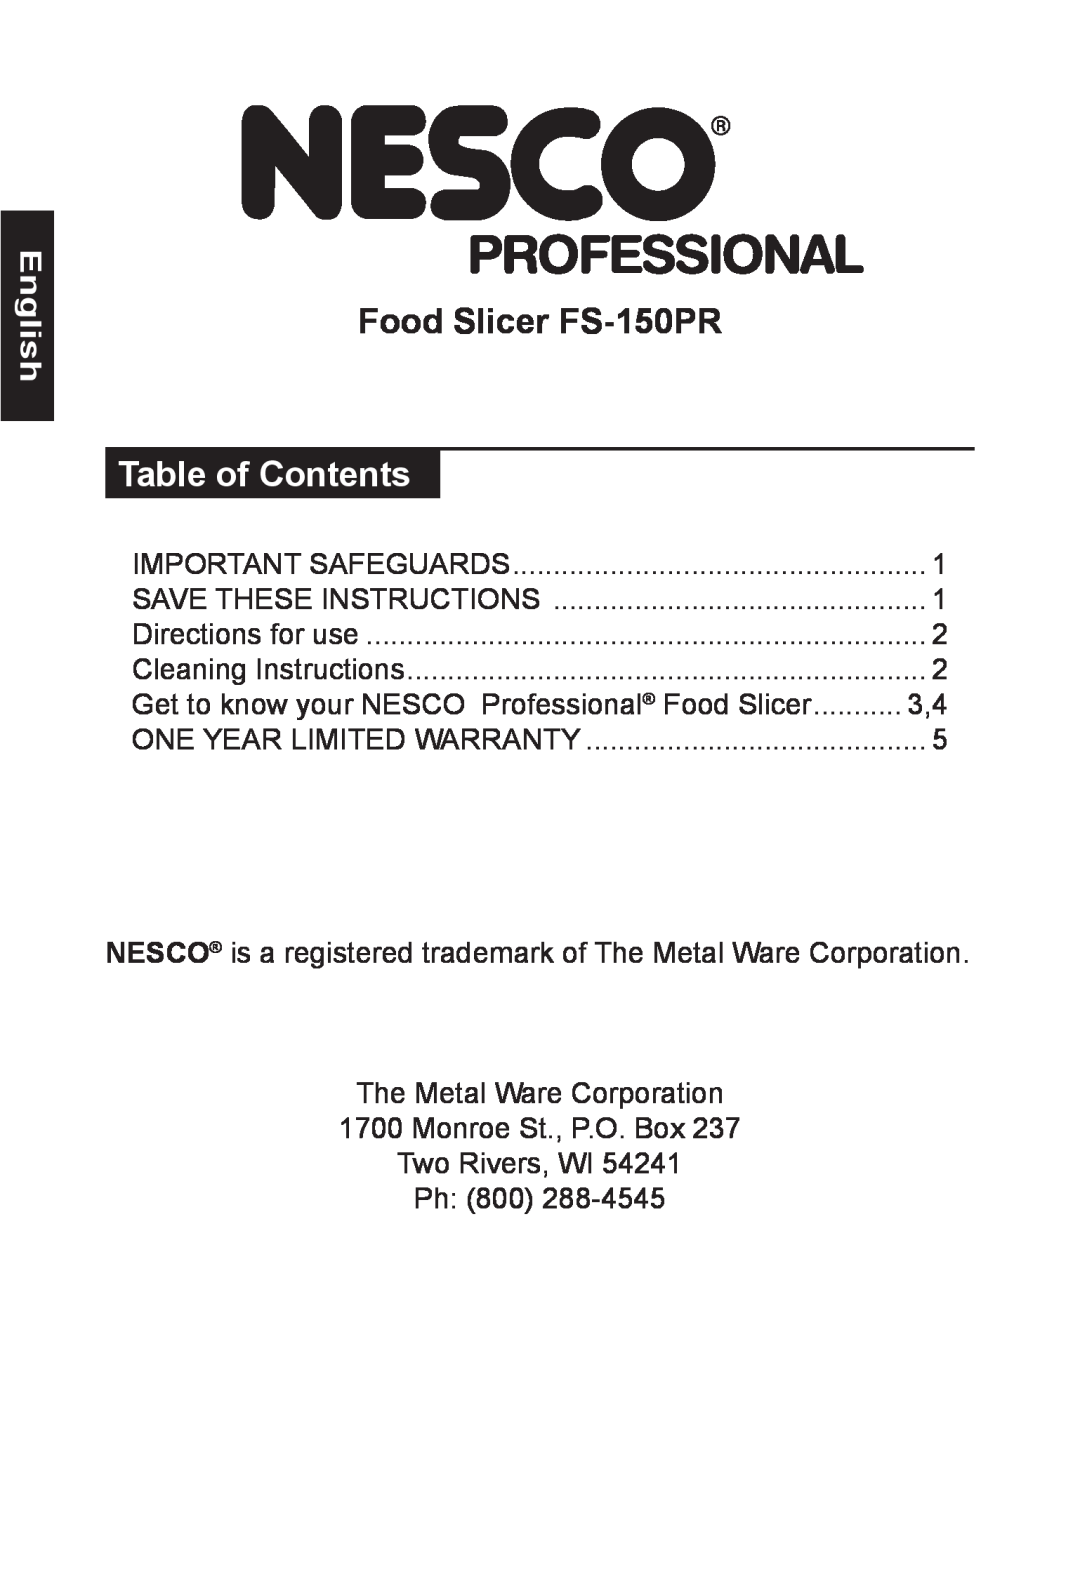 Nesco manual English, Food Slicer FS-150PR, Table of Contents 